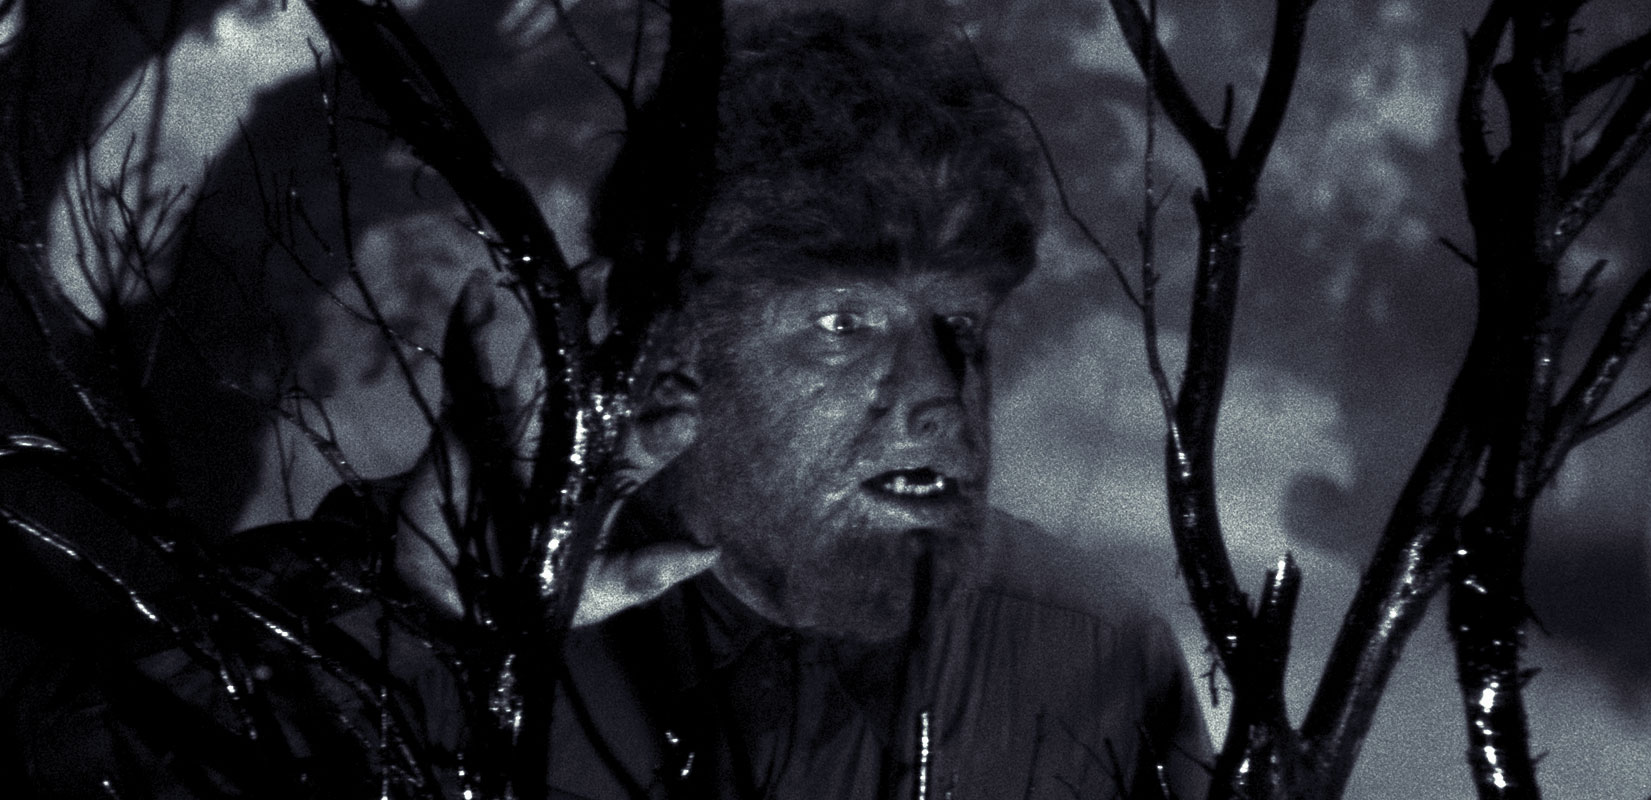 Universal Classic Monsters - The Wolf Man - Lon Chaney Jr.